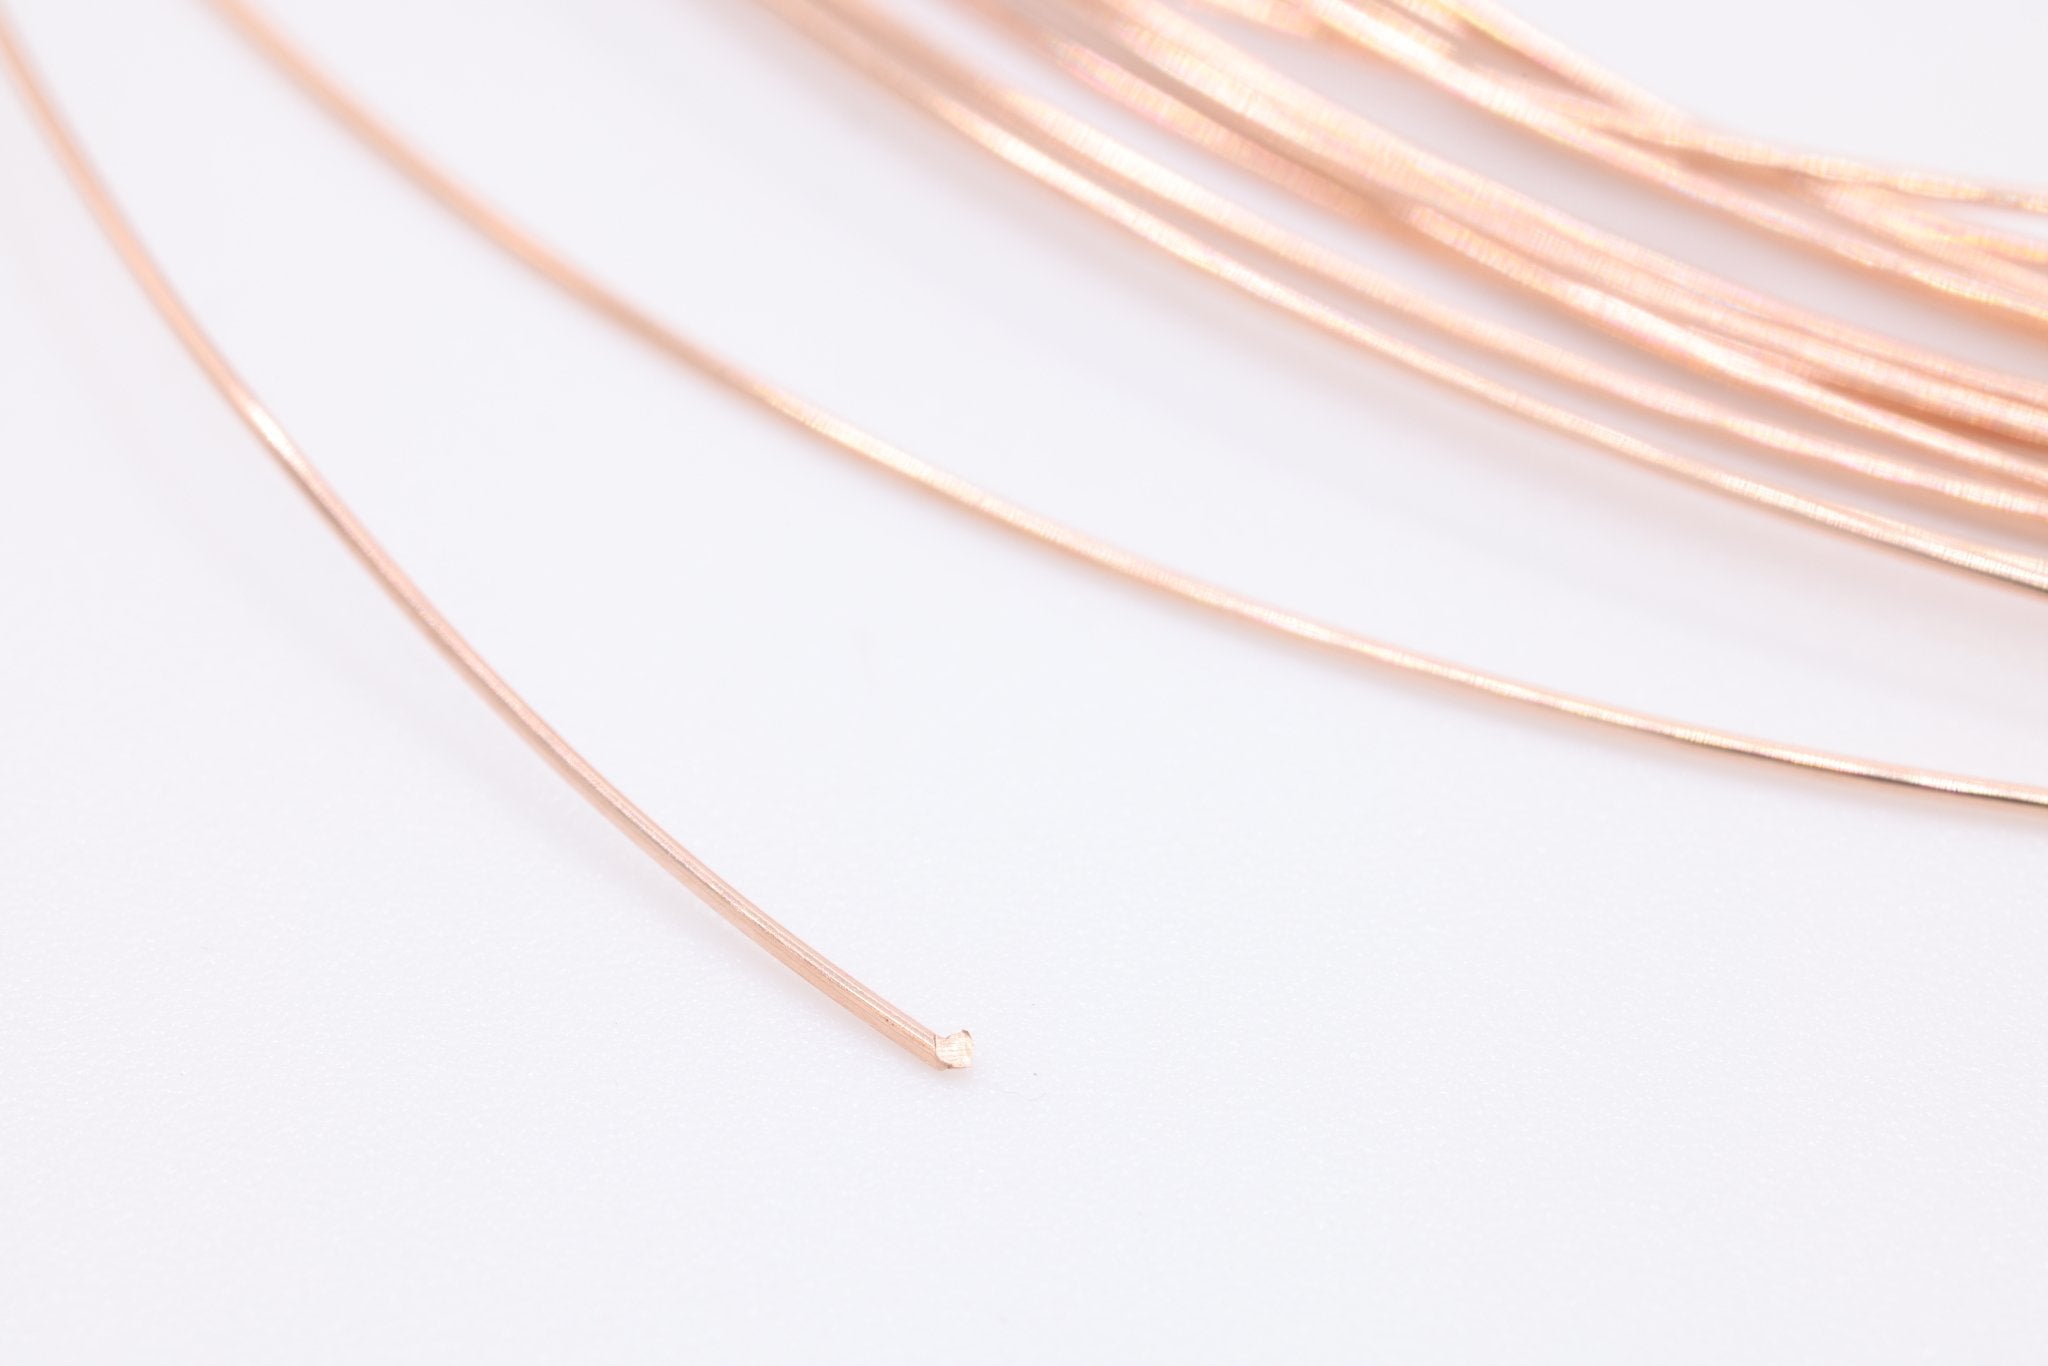 Rose Gold Filled Wire, 16 Gauge 1.27mm, Rose Gold-Filled, Half Hard Jewelry Wire - HarperCrown